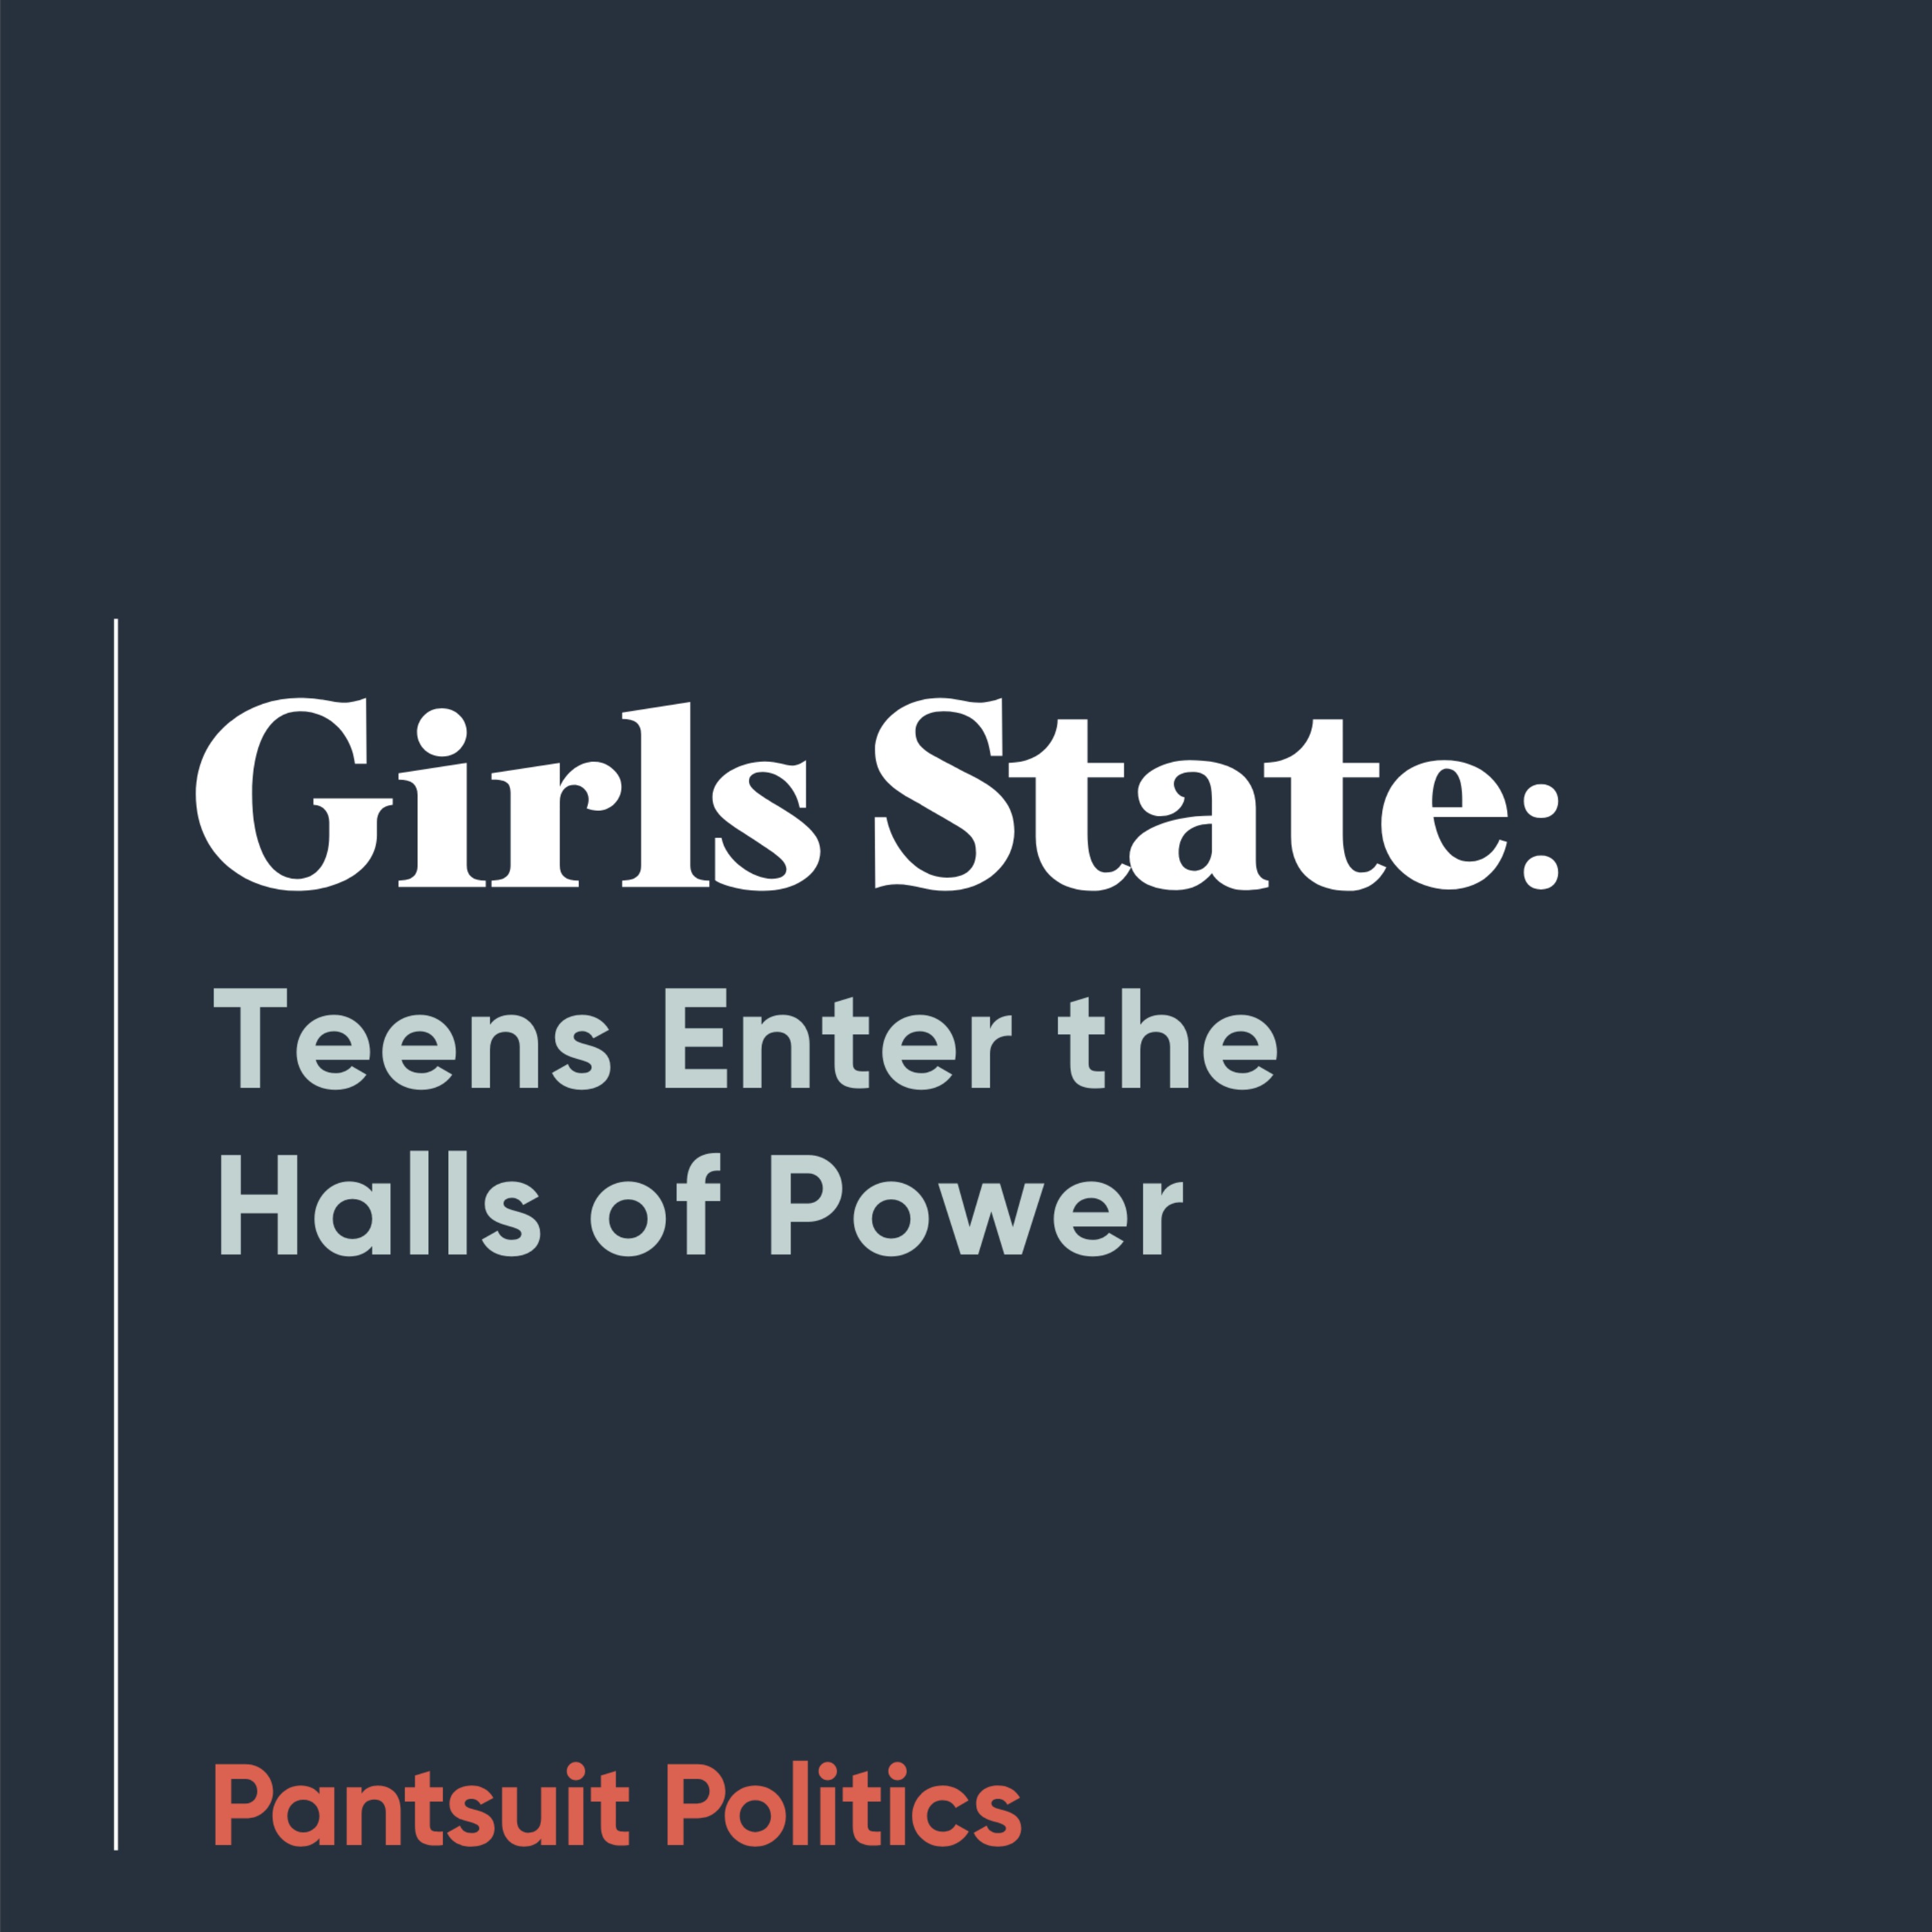 Girls State: Teens Enter the Halls of Power